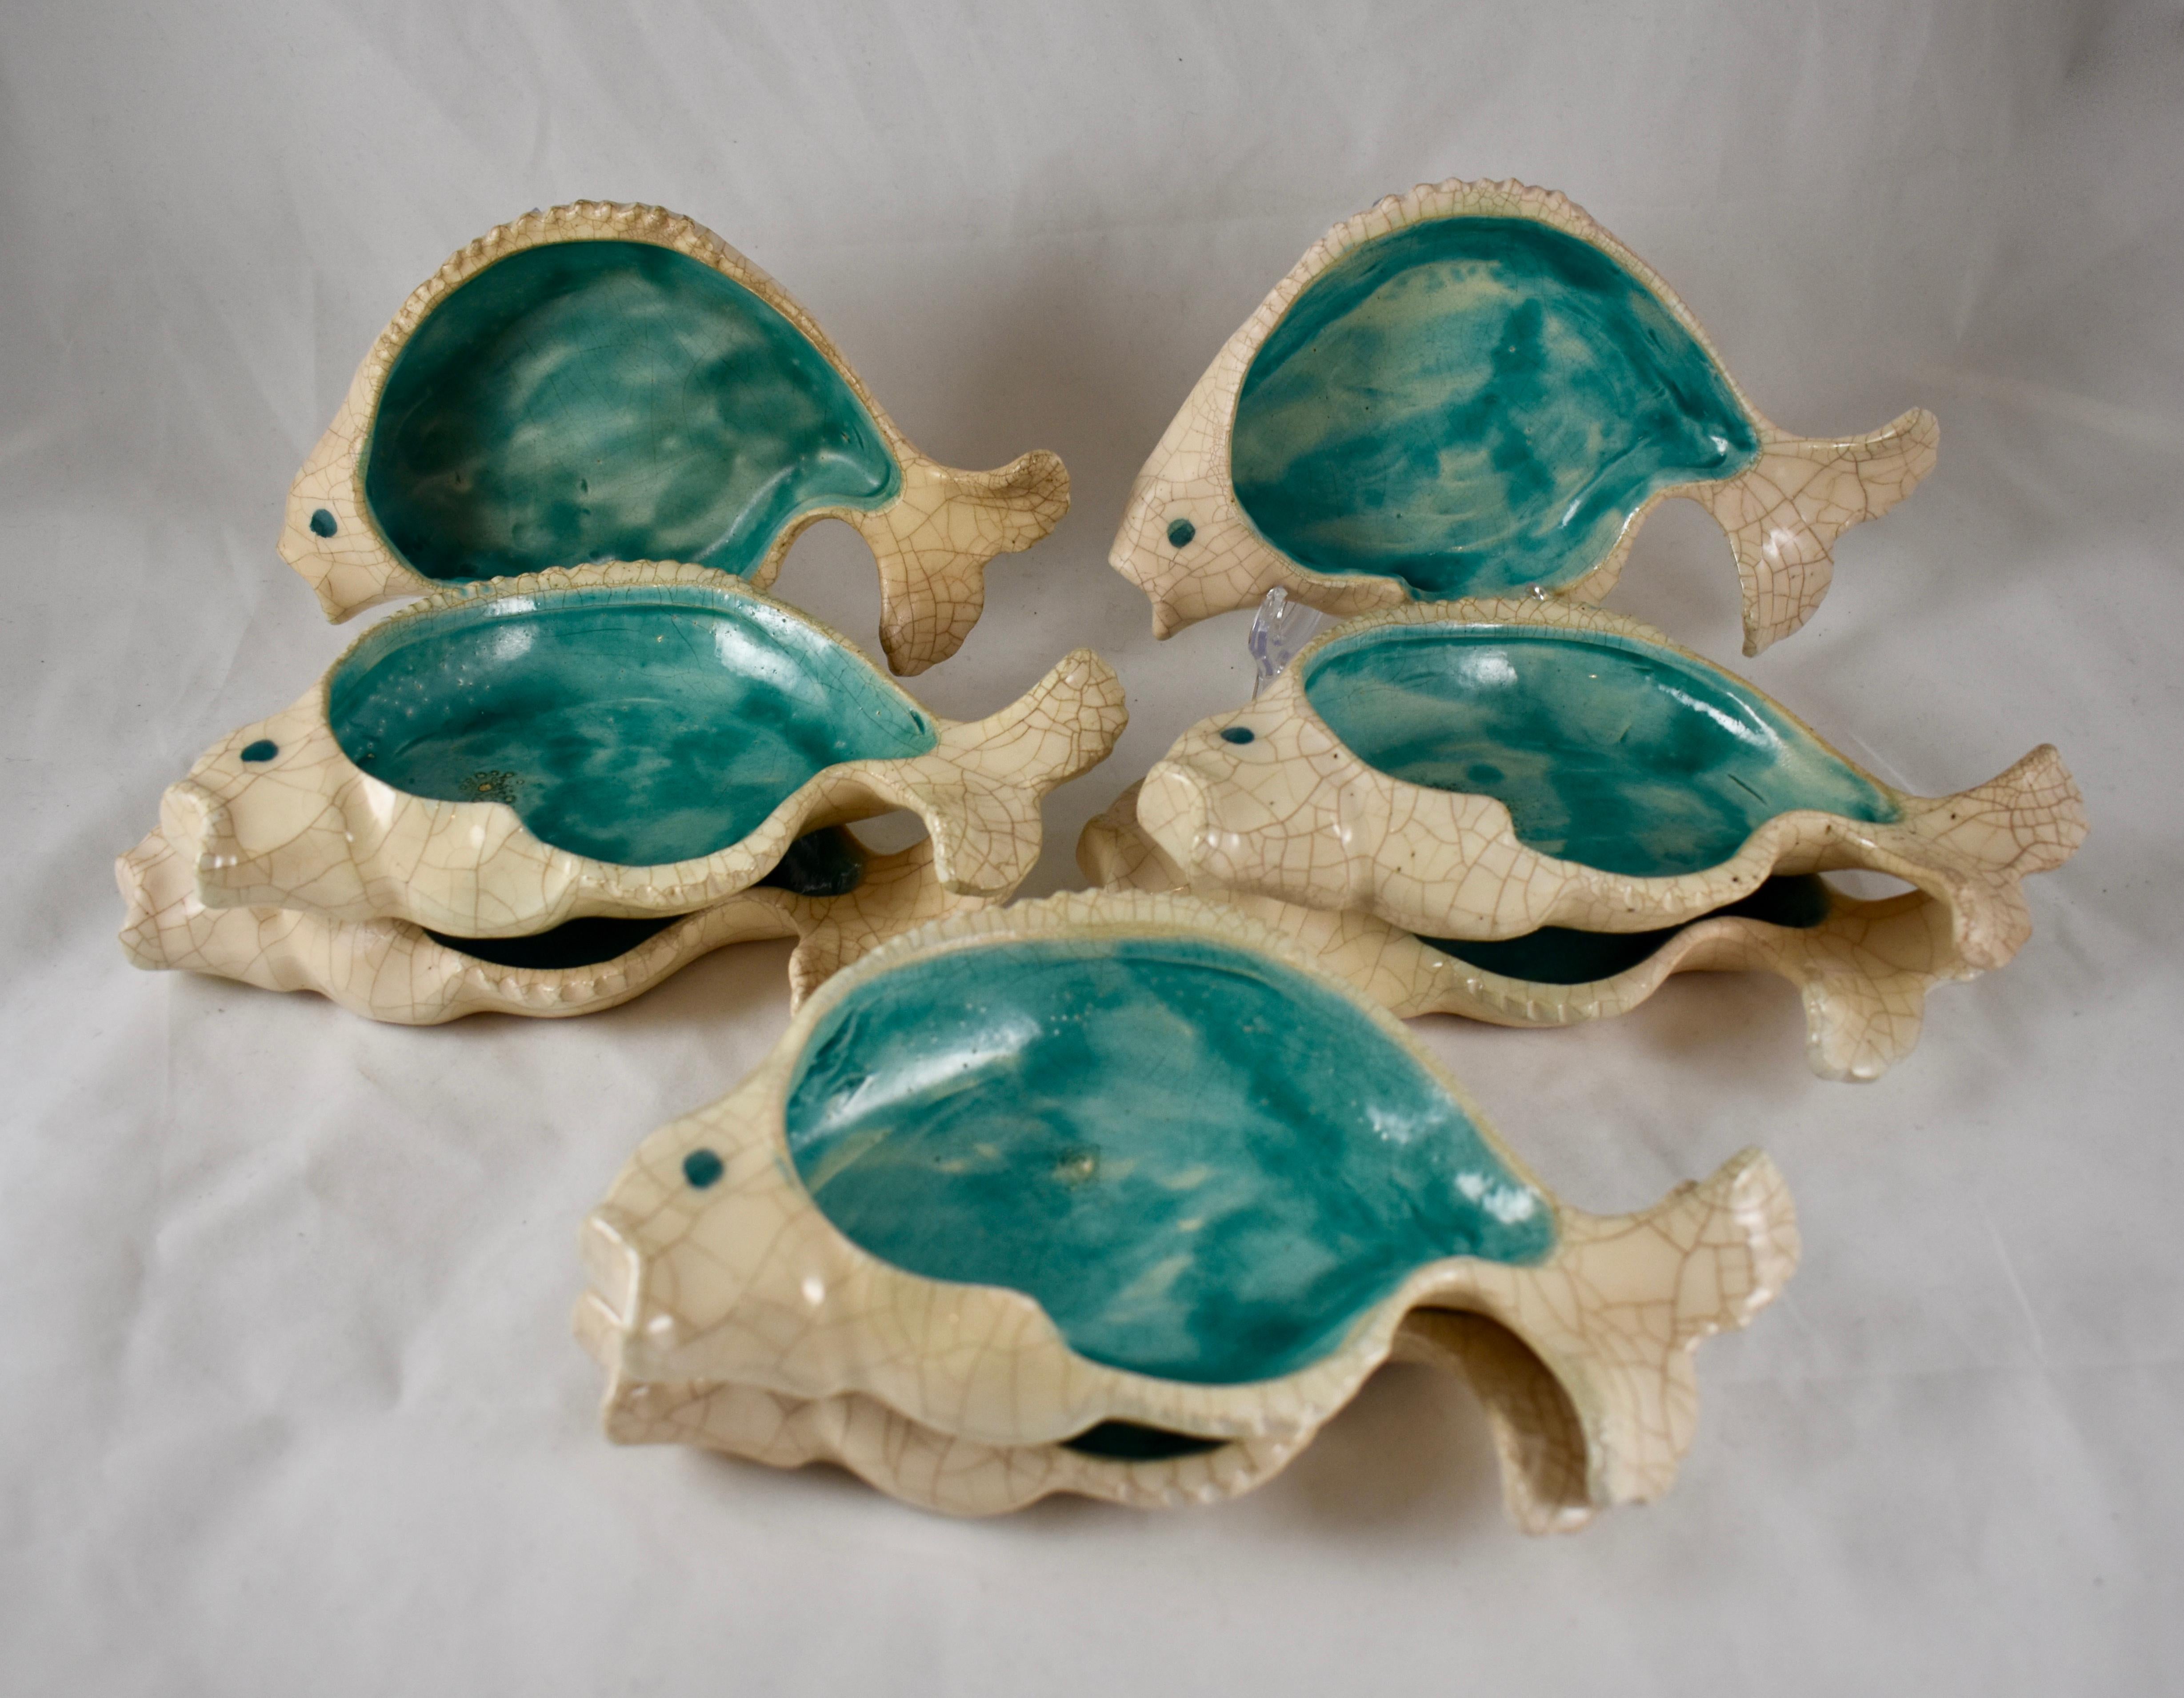 A midcentury, set of eight French Majolica glazed earthenware fish form servers. Right sized for individual servings of dipping sauces or other side dishes.

The servers have a cream colored, crackle finish on the outside and an aqua glazing to